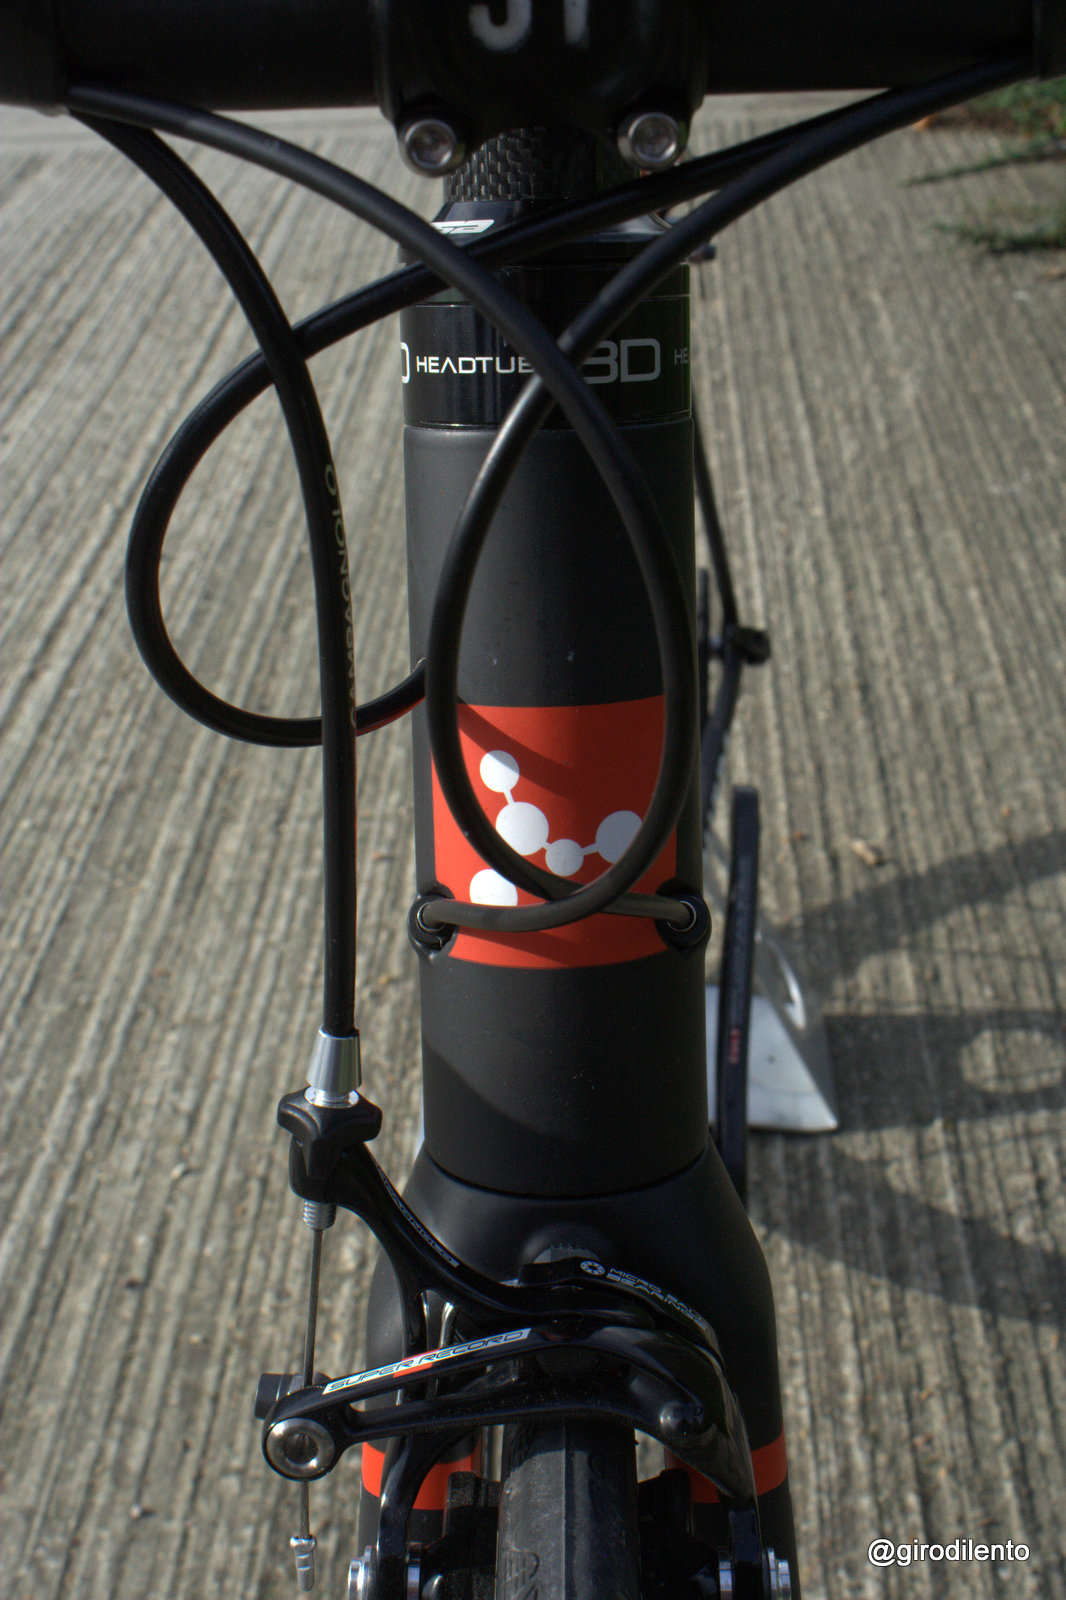 2014 Argon 18 with a view of the headtube multi heights design that adds more stiffness with a longer headtube